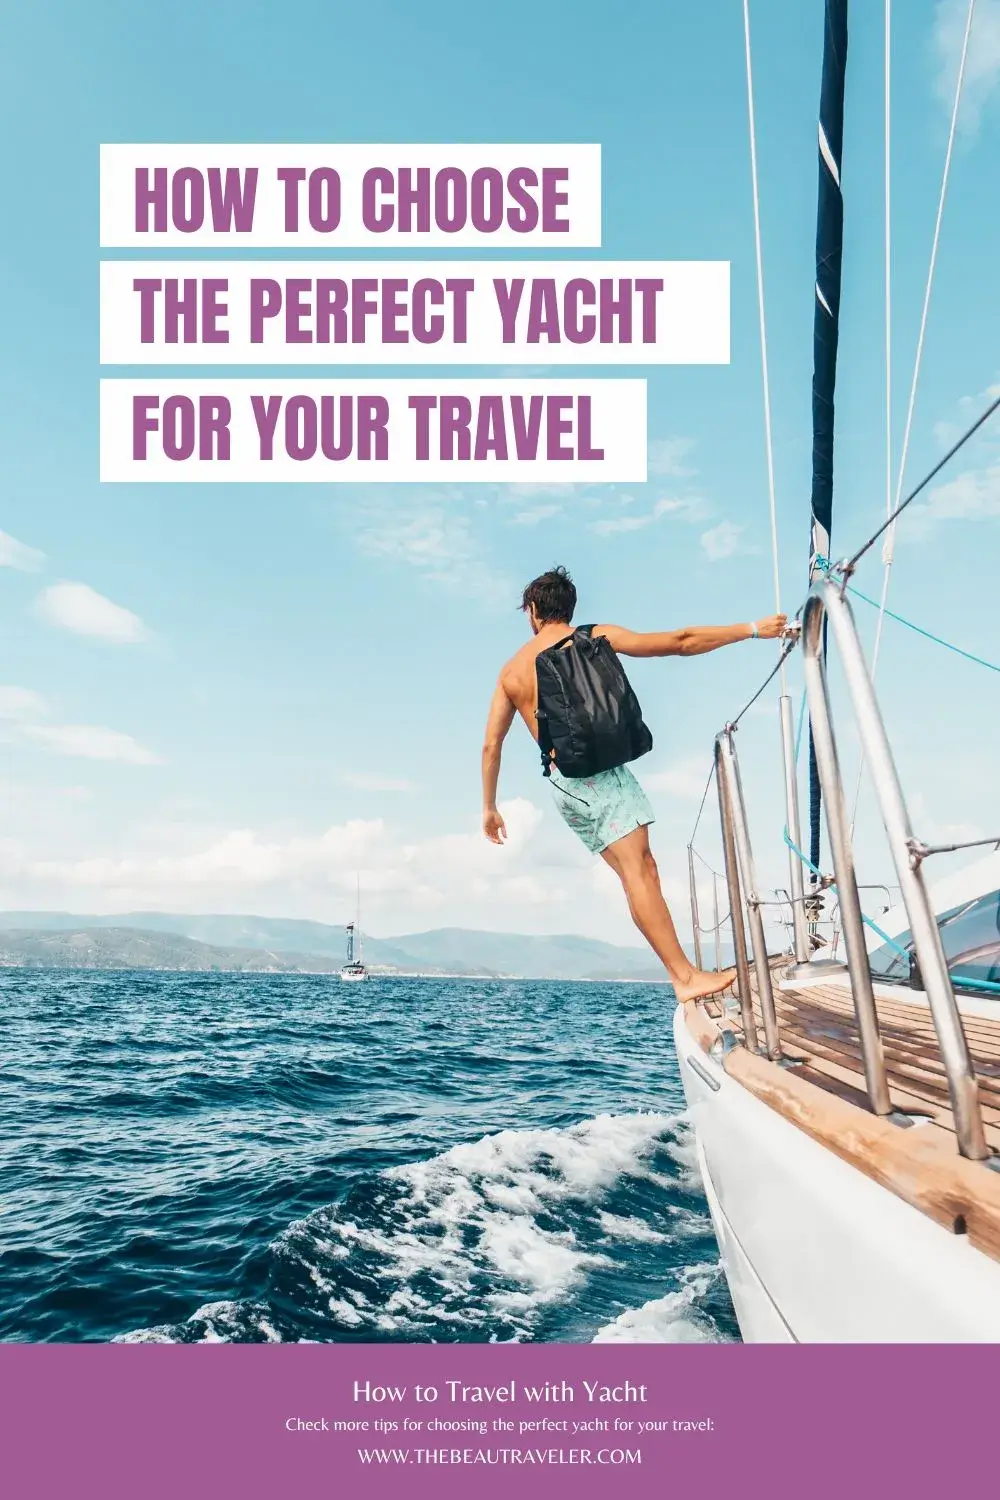 How to Choose the Perfect Yacht for Your Travels - The BeauTraveler